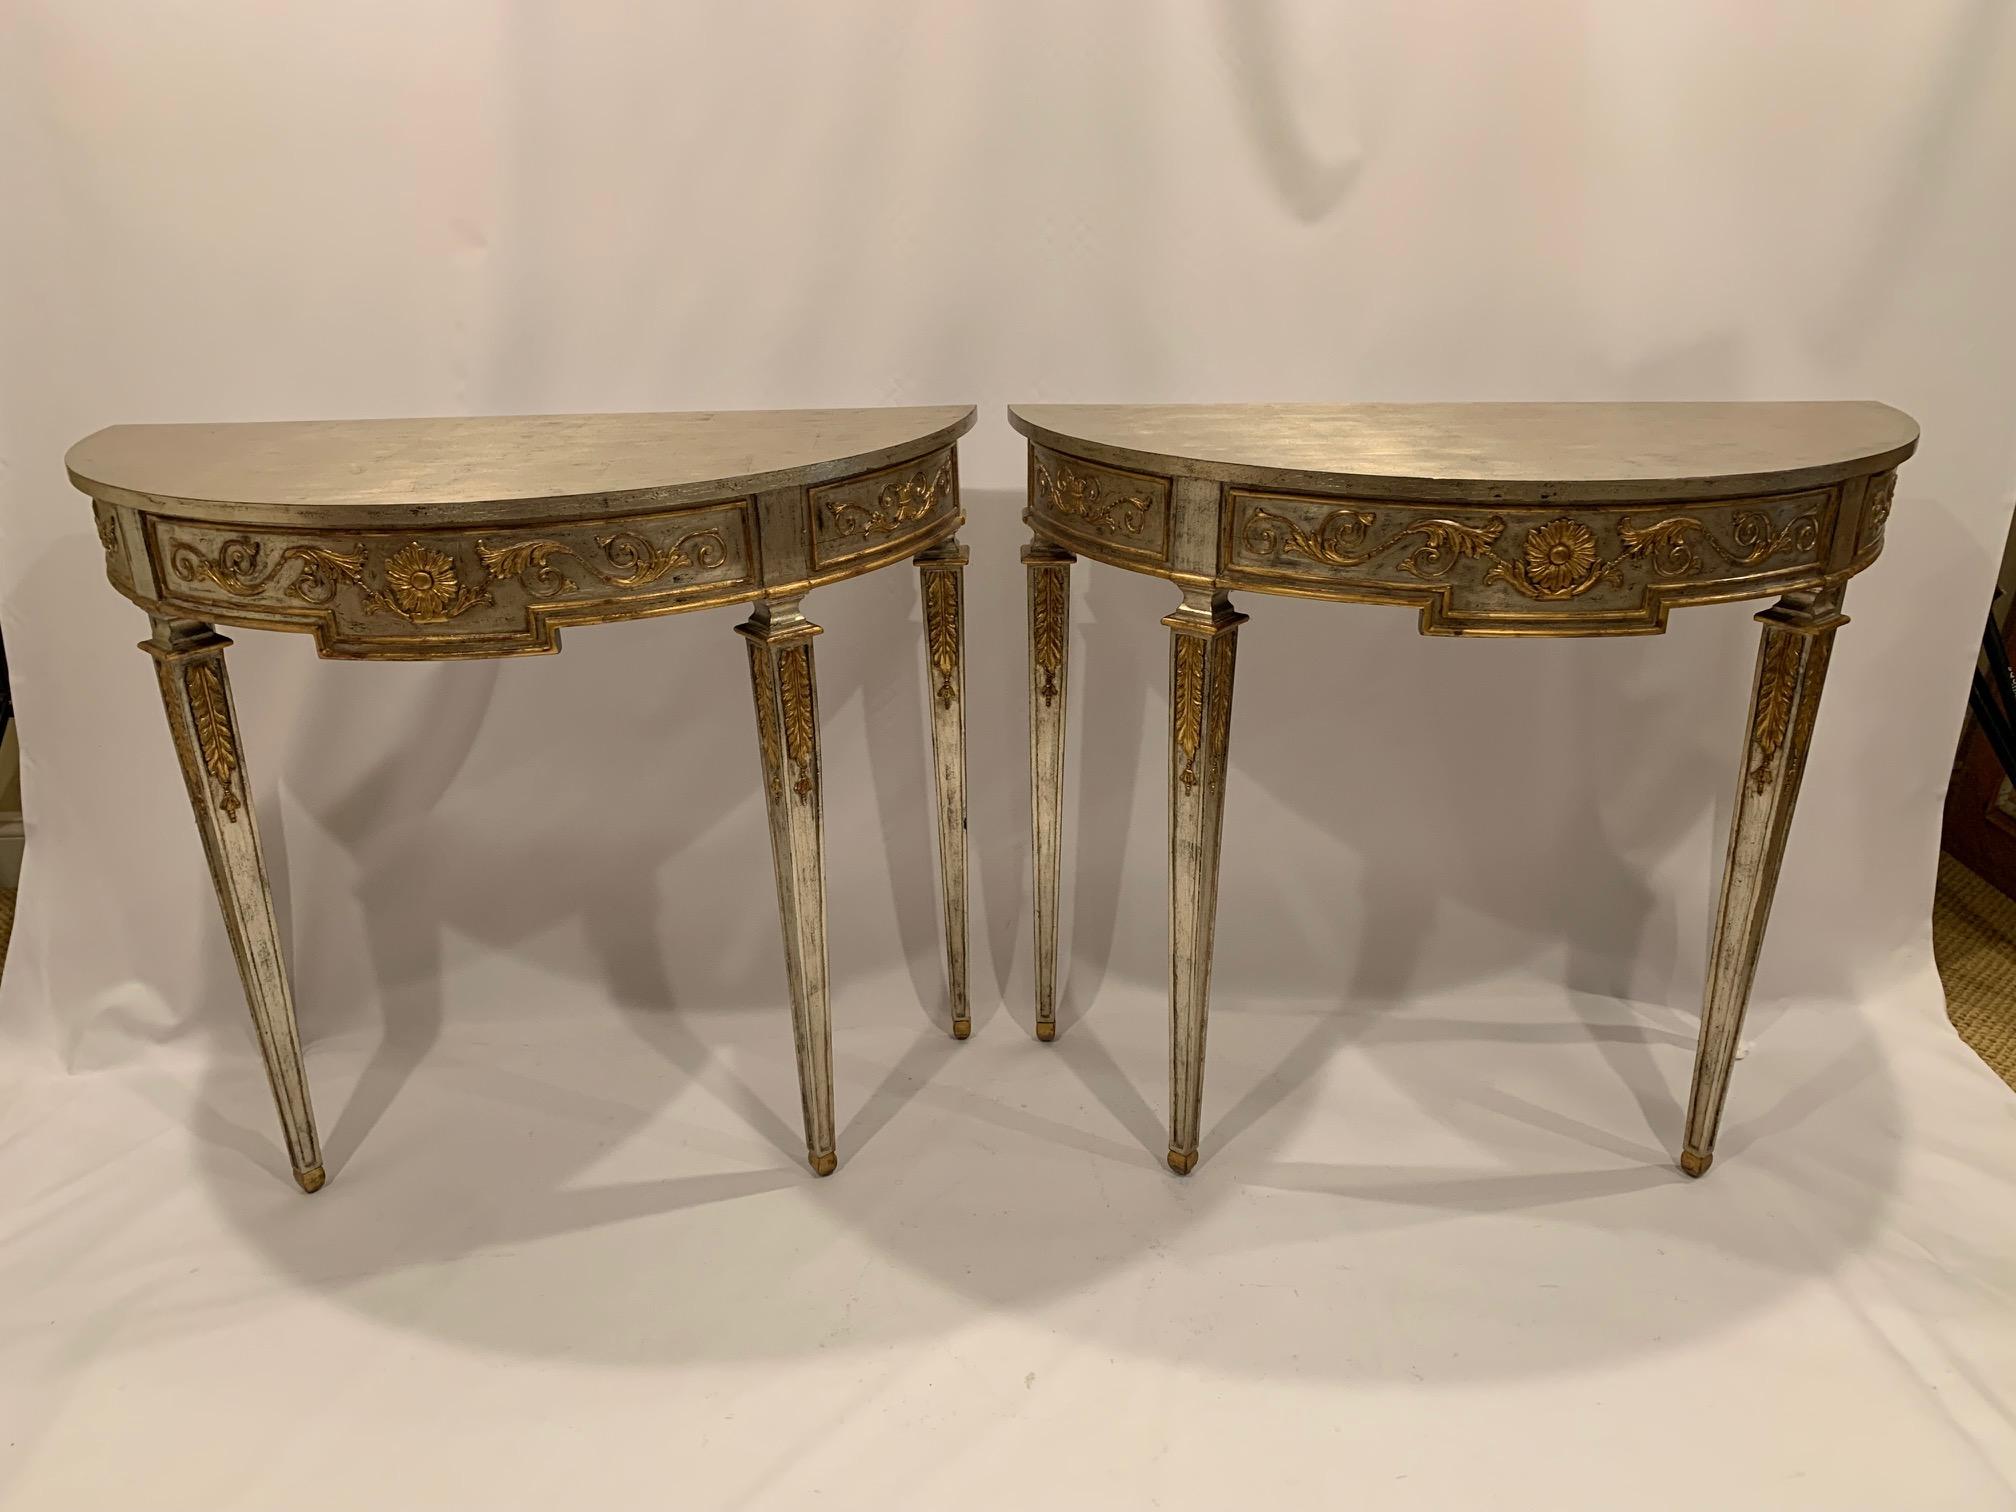 A very glamorous pretty pair of silver leaf carved wood demilune consoles having splendid gold gilded details.  The silver and gold leaf compliment eachother magnificently.